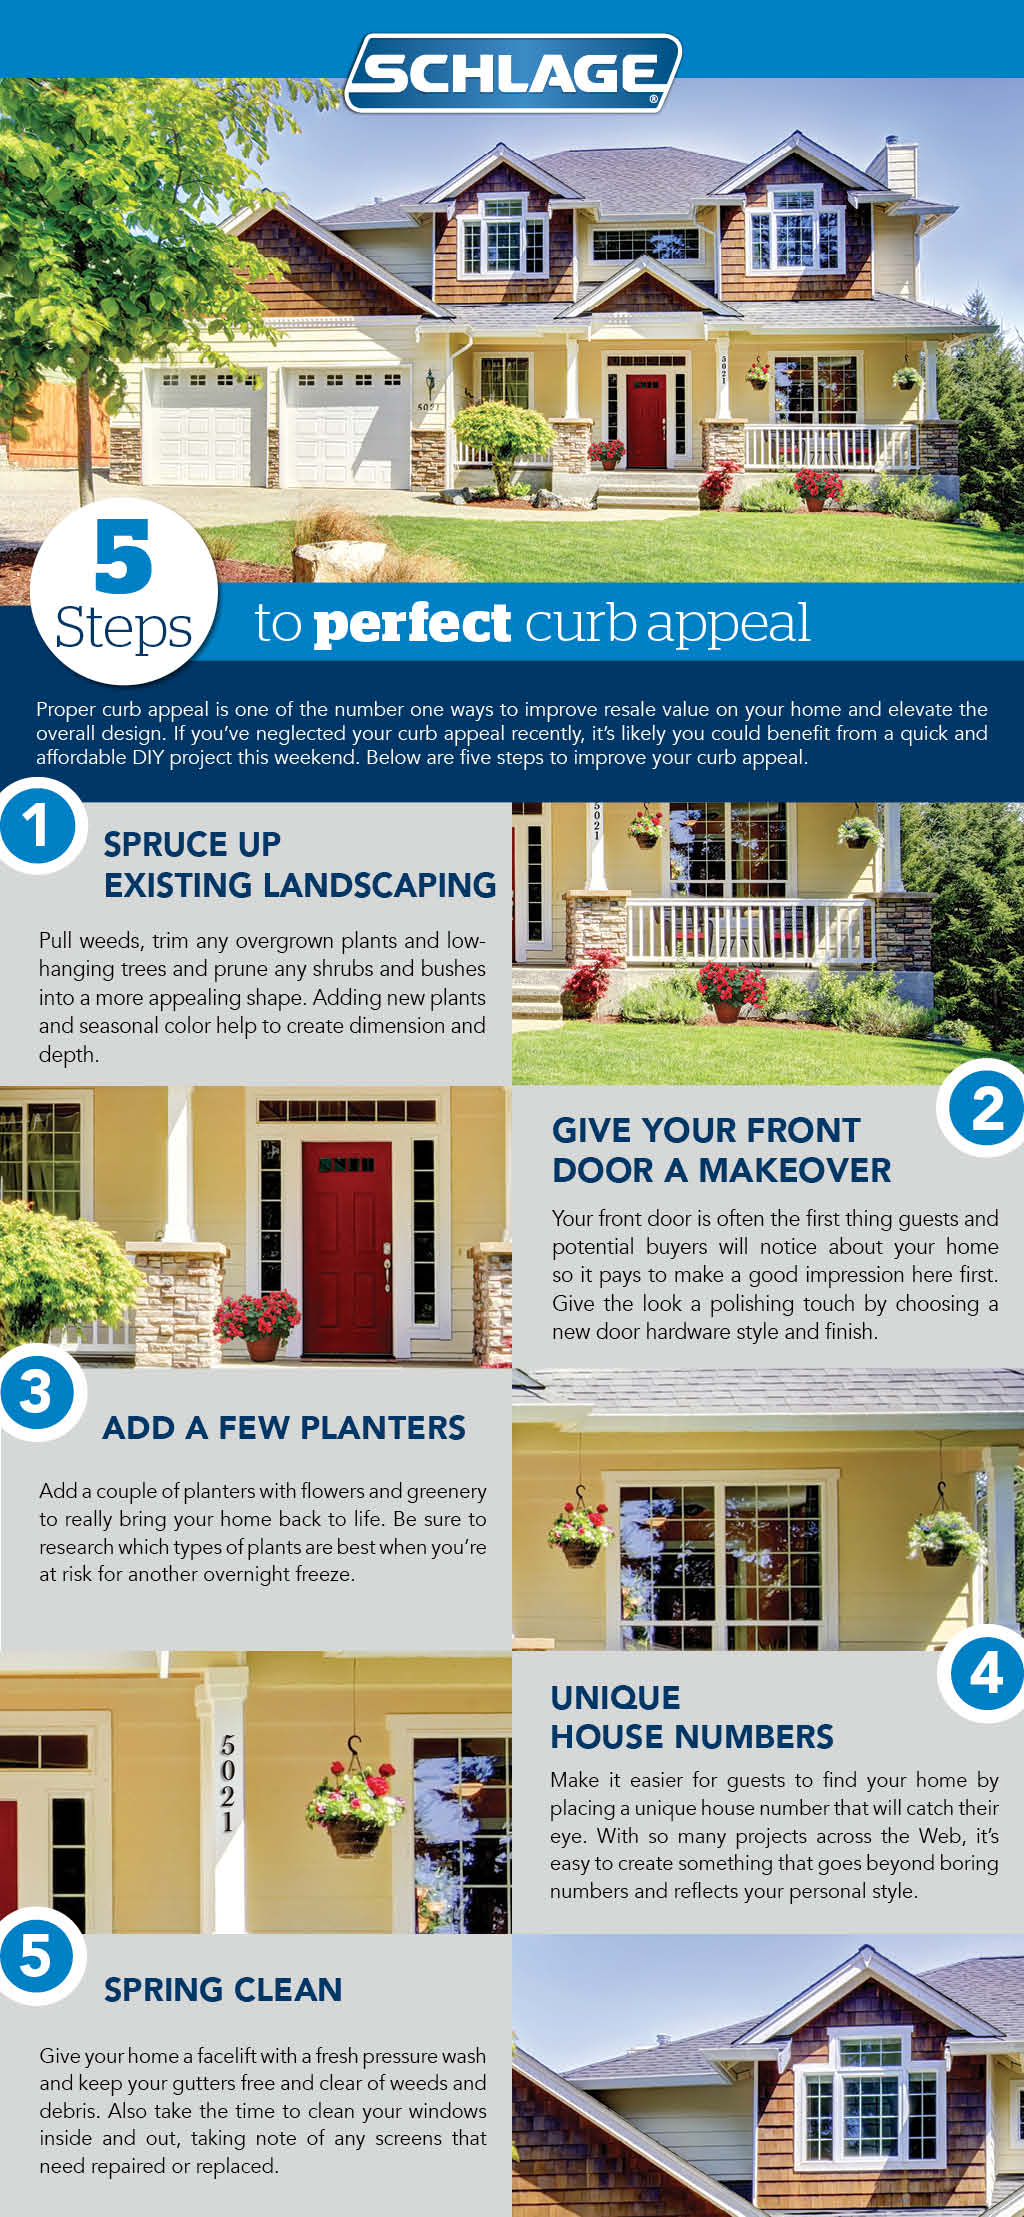 5 steps to perfect curb appeal | Schlage